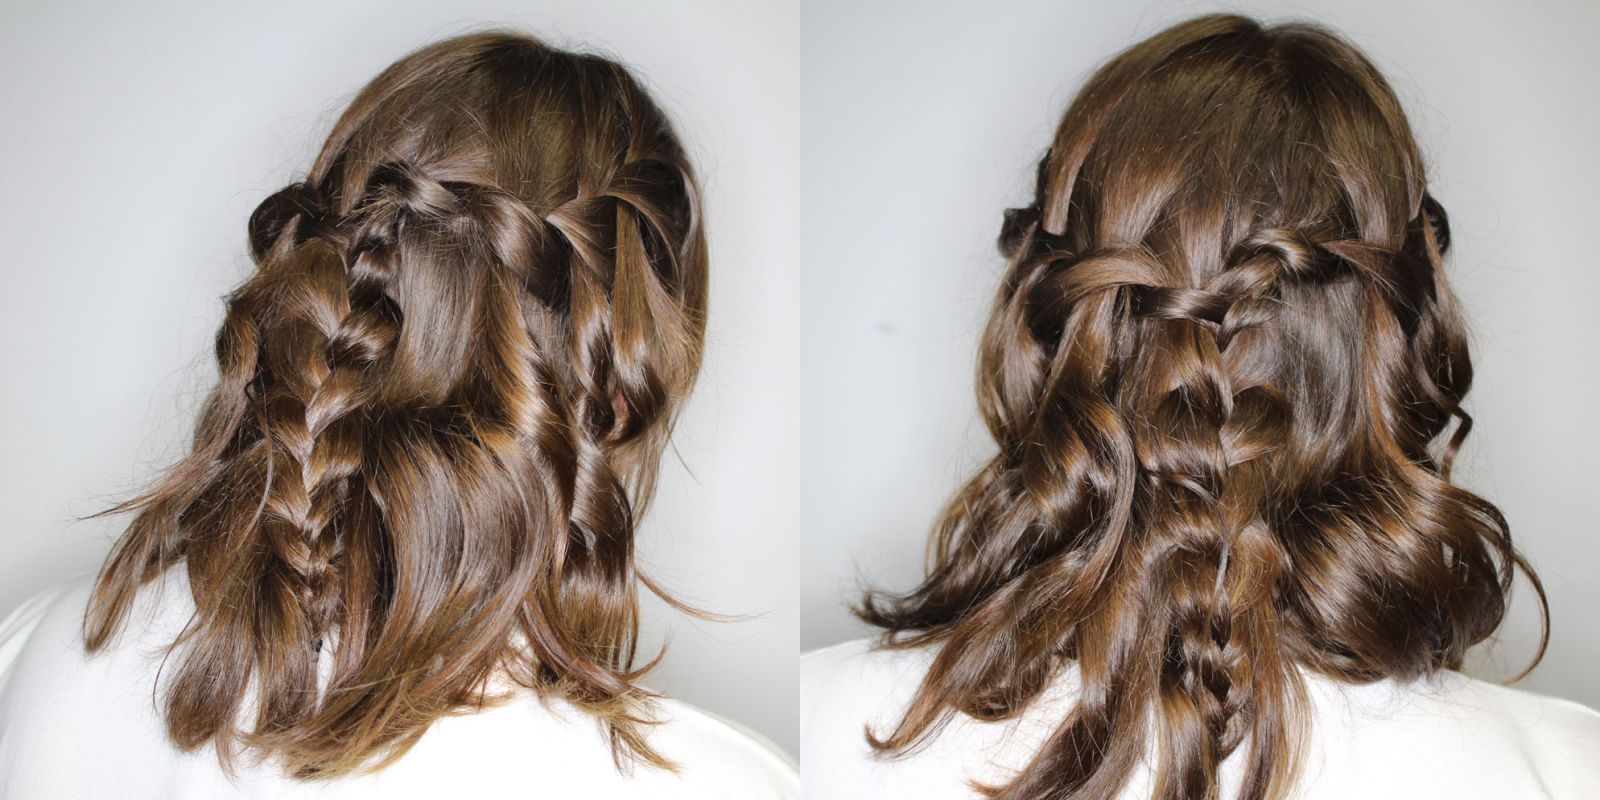 How to Explain the Wedding Hairstyle You Want to Your Bridal Hair Stylist |  Make Me Bridal